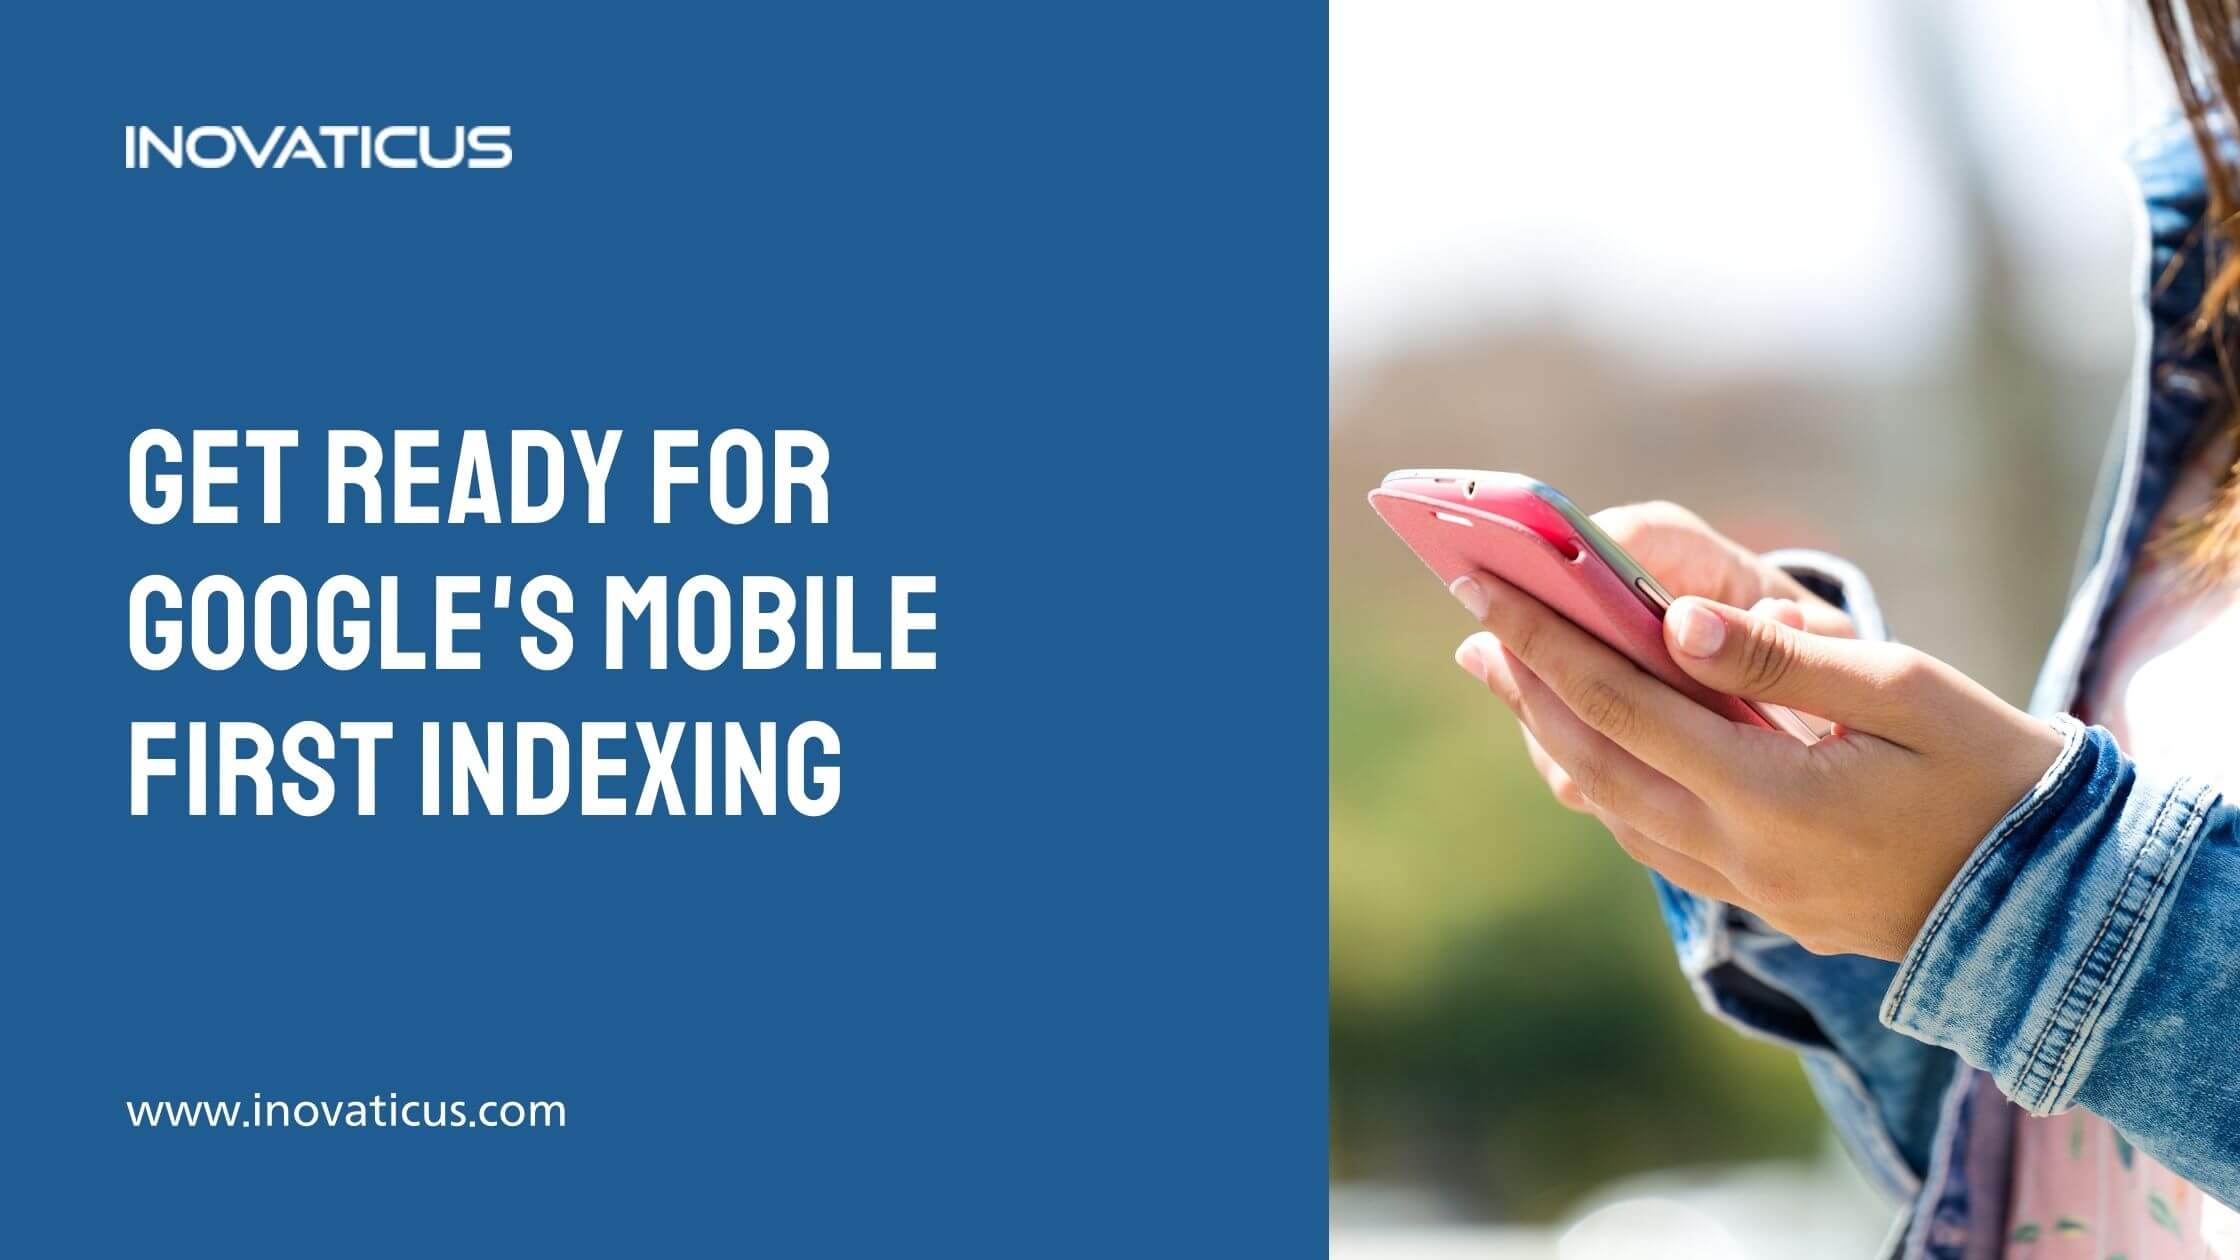 Get Ready For Google's Mobile First Indexing